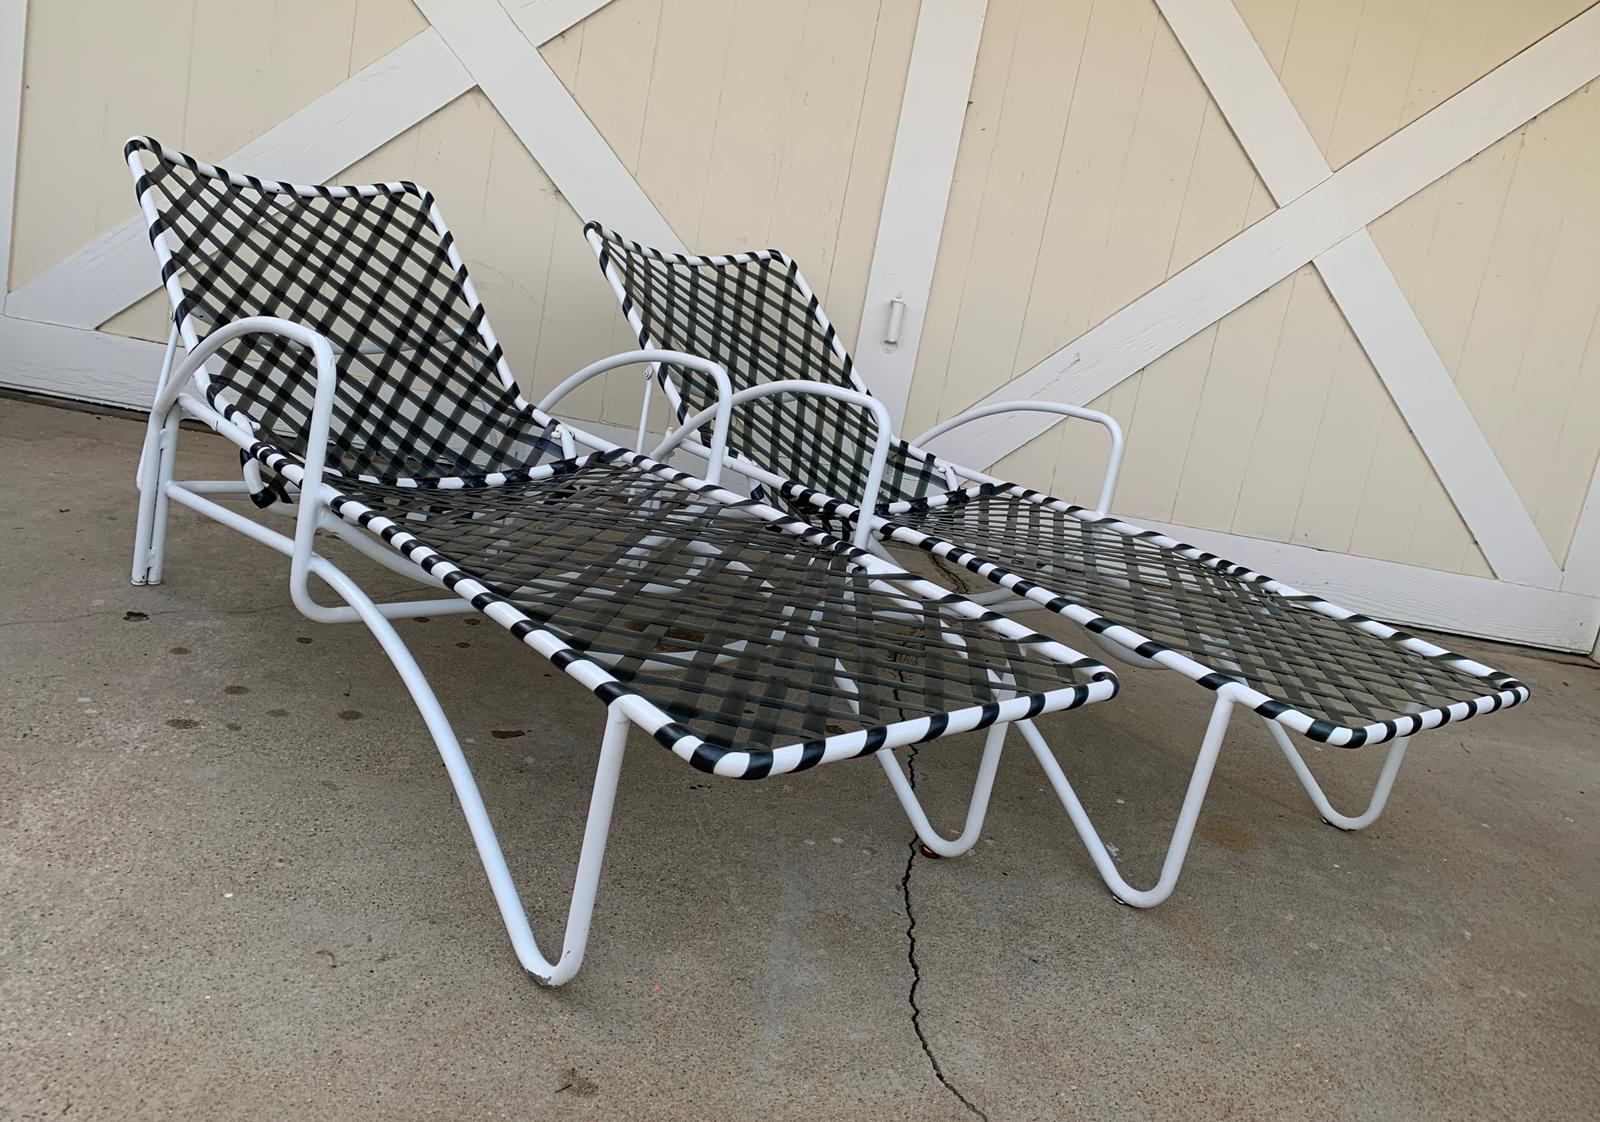 Rare Brown Jordan Lido chaise lounge chairs in white with greenish vinyl strapping.
In good vintage condition. Straps are solid and complete with some sun fade/oxidation. Frame shows some scratches and finish wear consistent with age and